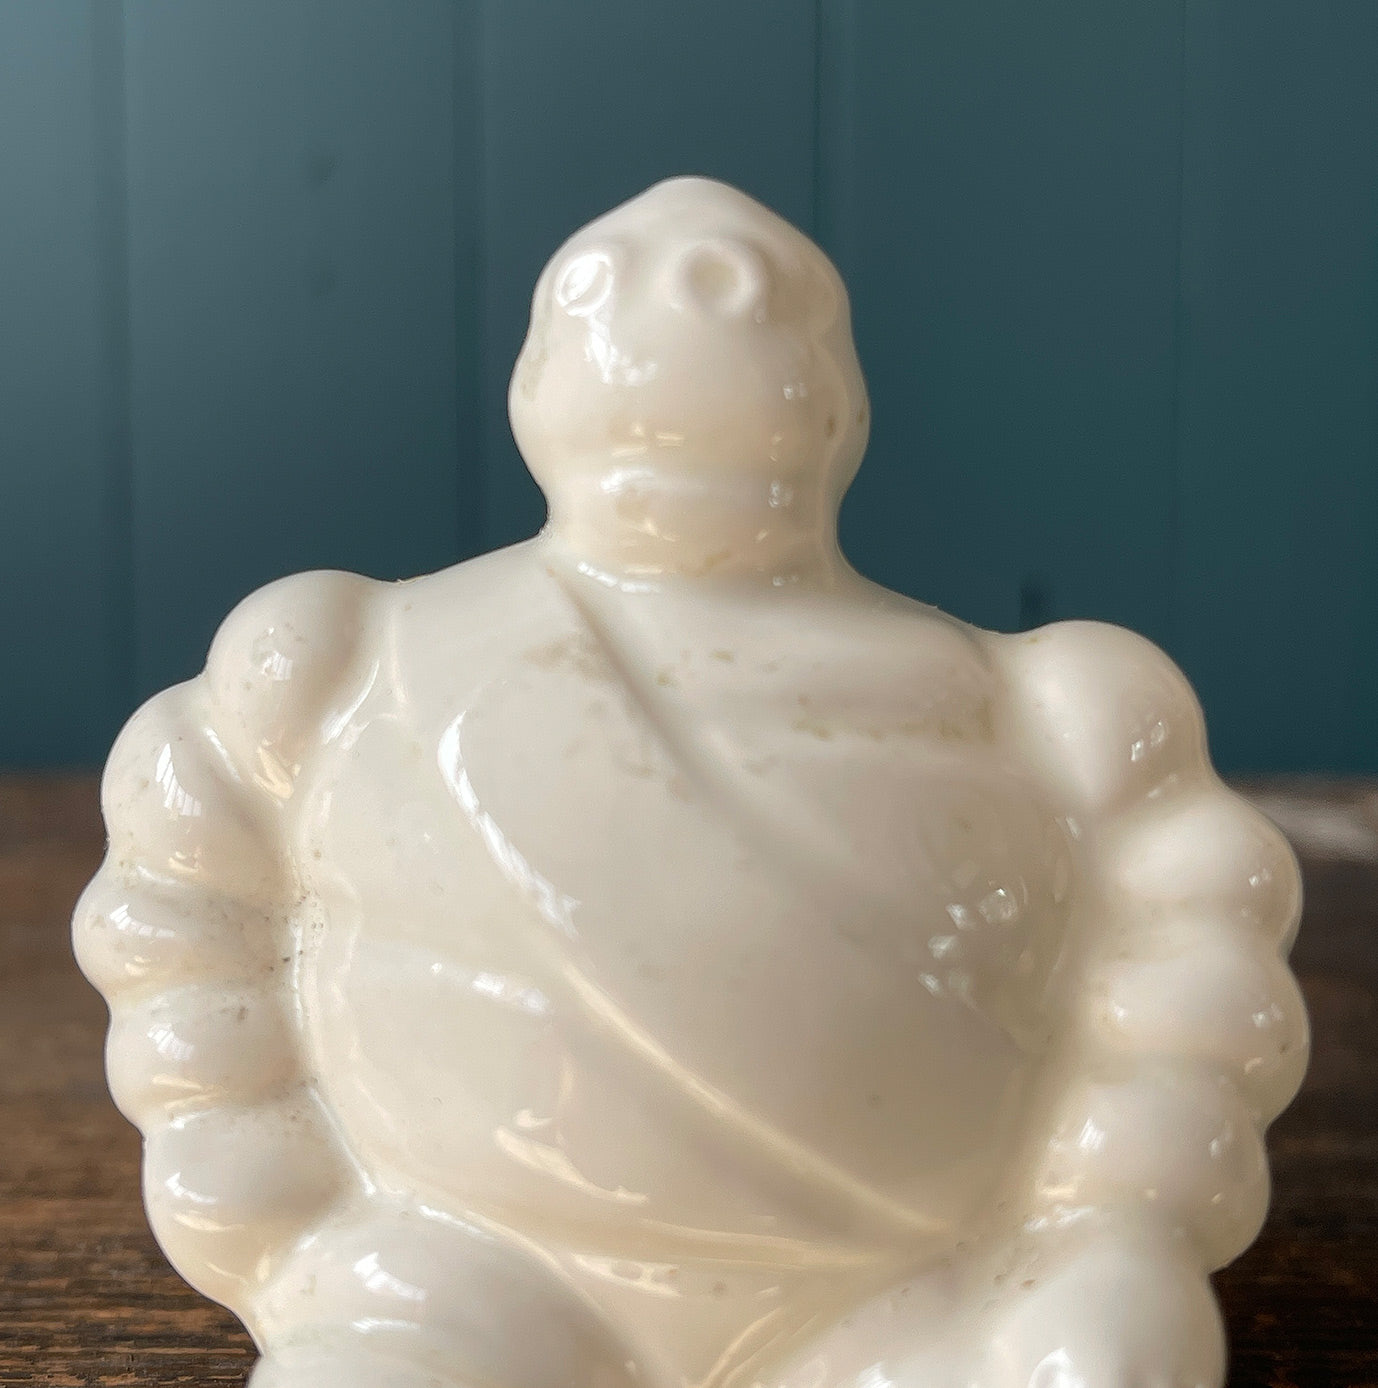 A Vintage Ceramic Bibendum Michelin Man with a hole in his bottom! This little fellow would have sat on an ashtray hence the hole is his bottom. He's now in the perfect position to sit on the edge of a shelf - SHOP NOW - www.intovintage.co.uk